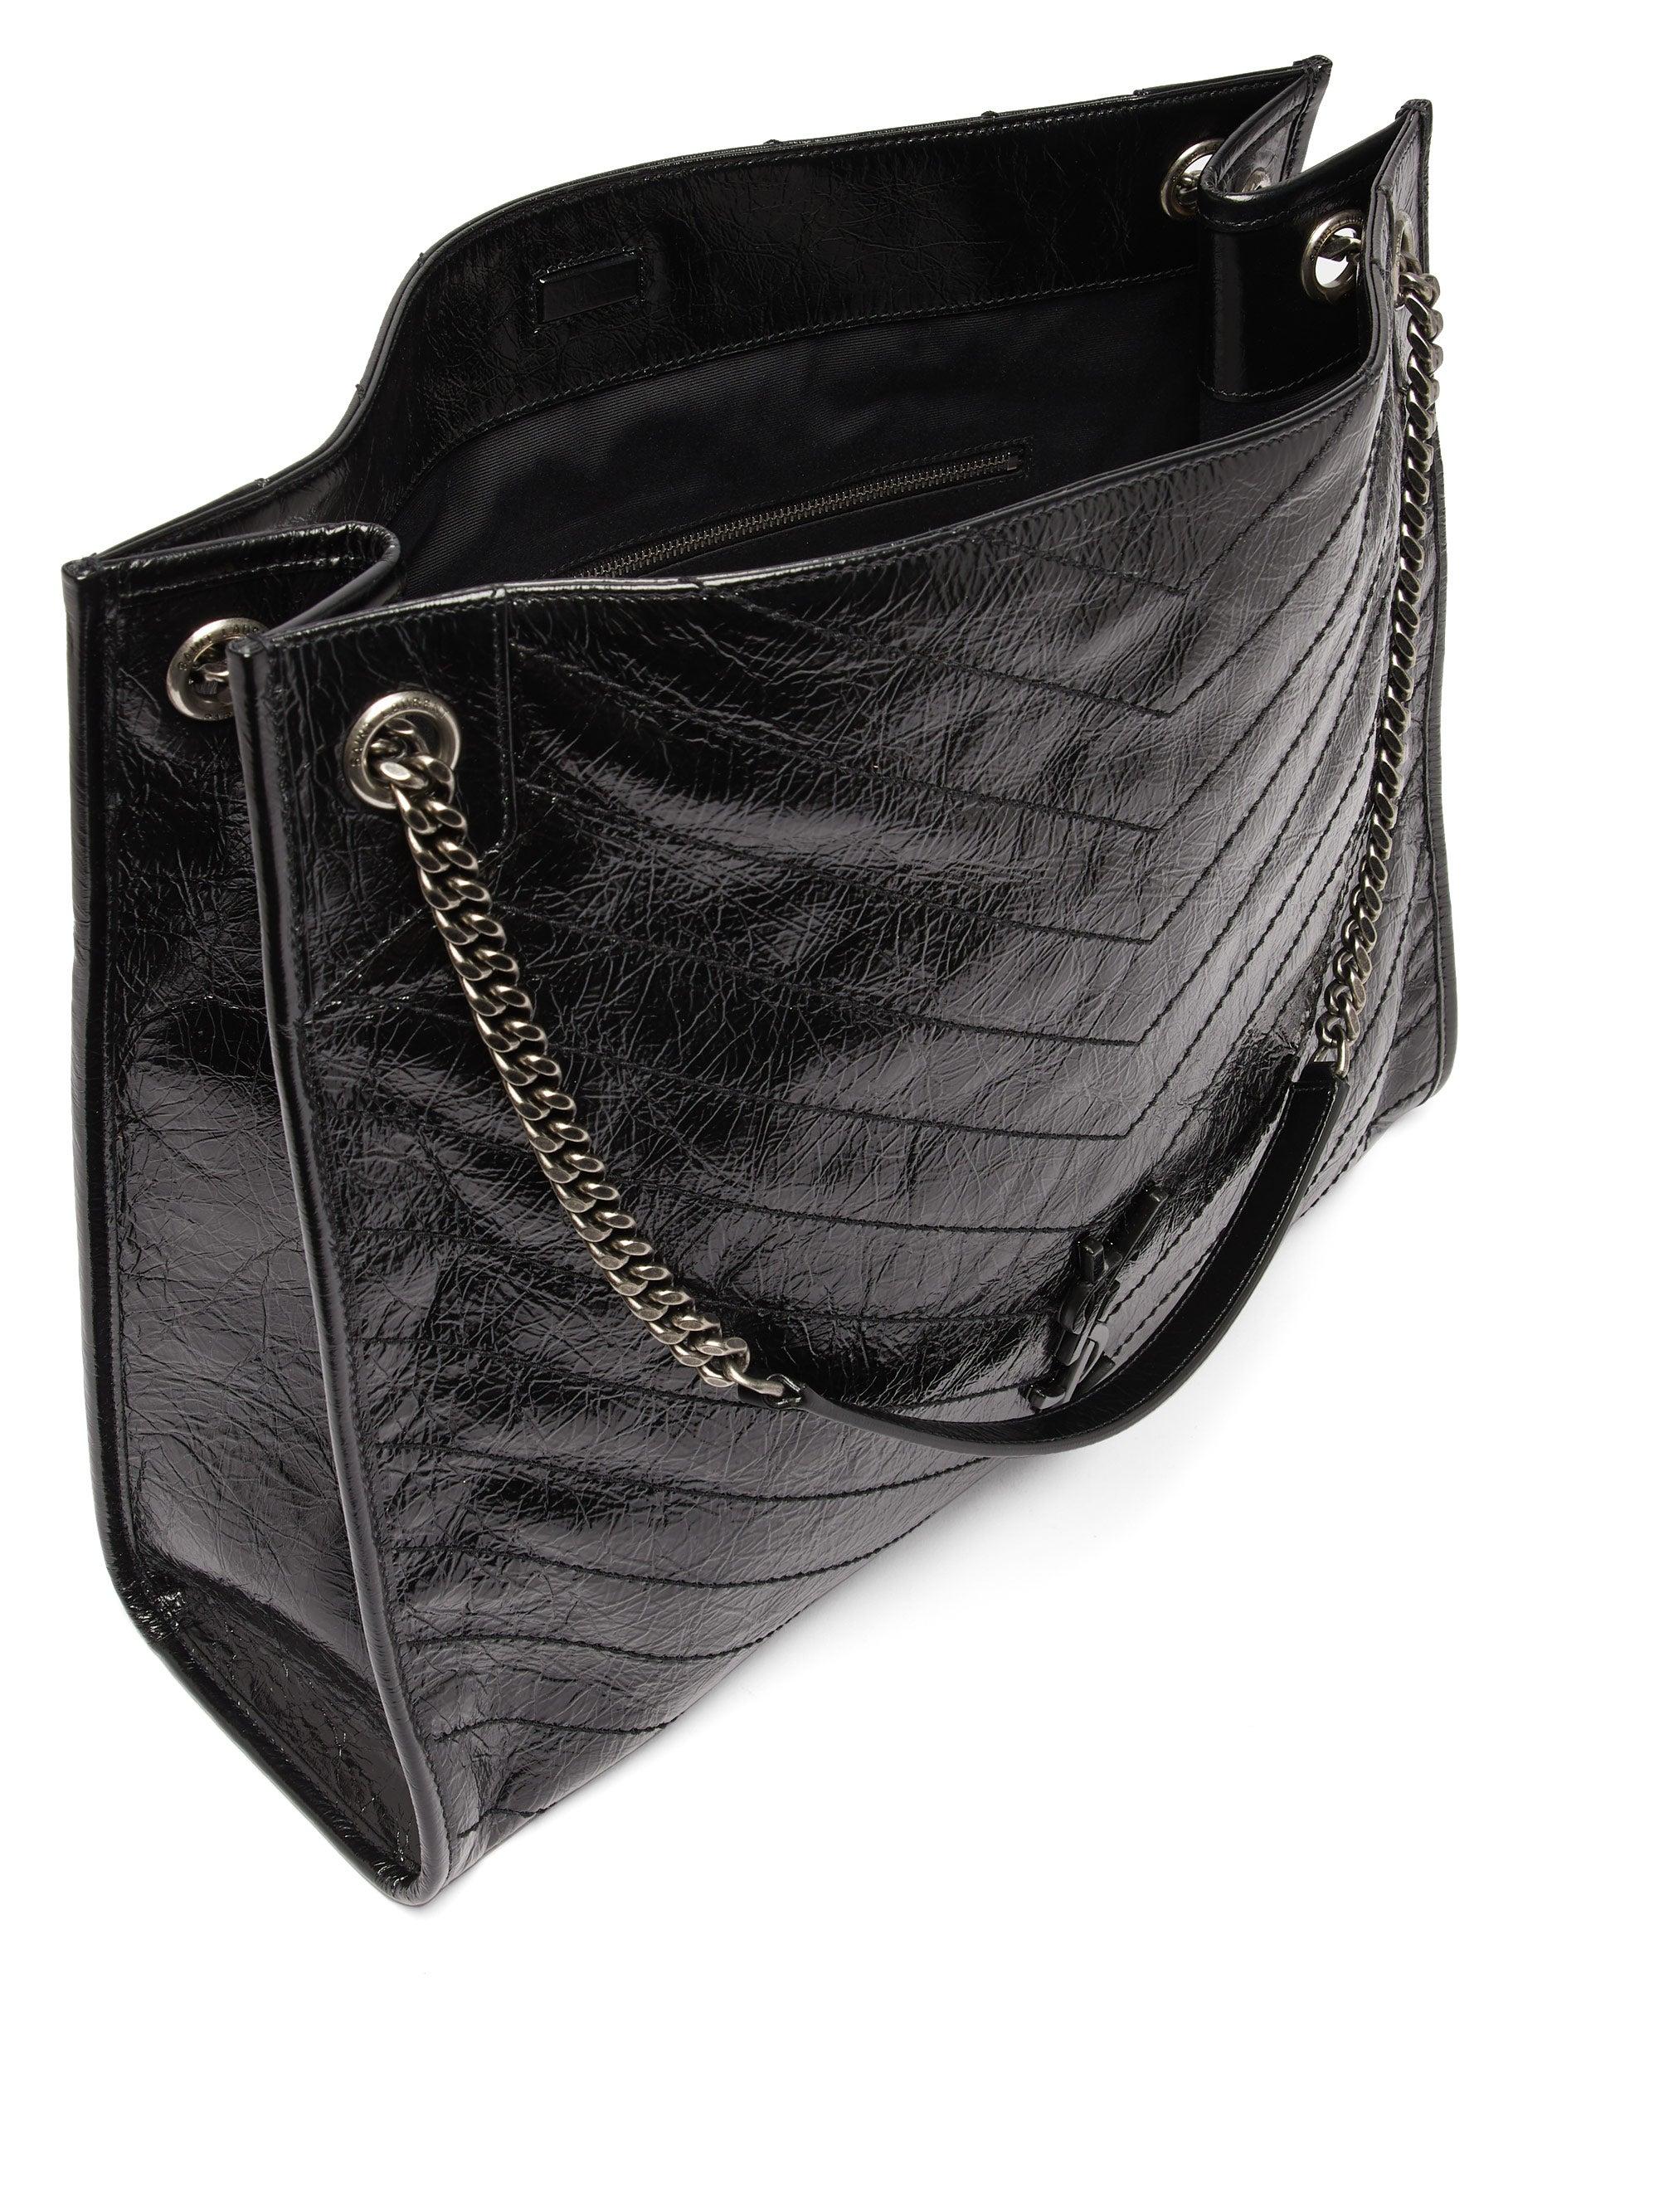 SAINT LAURENT: Niki bag in quilted leather - Black